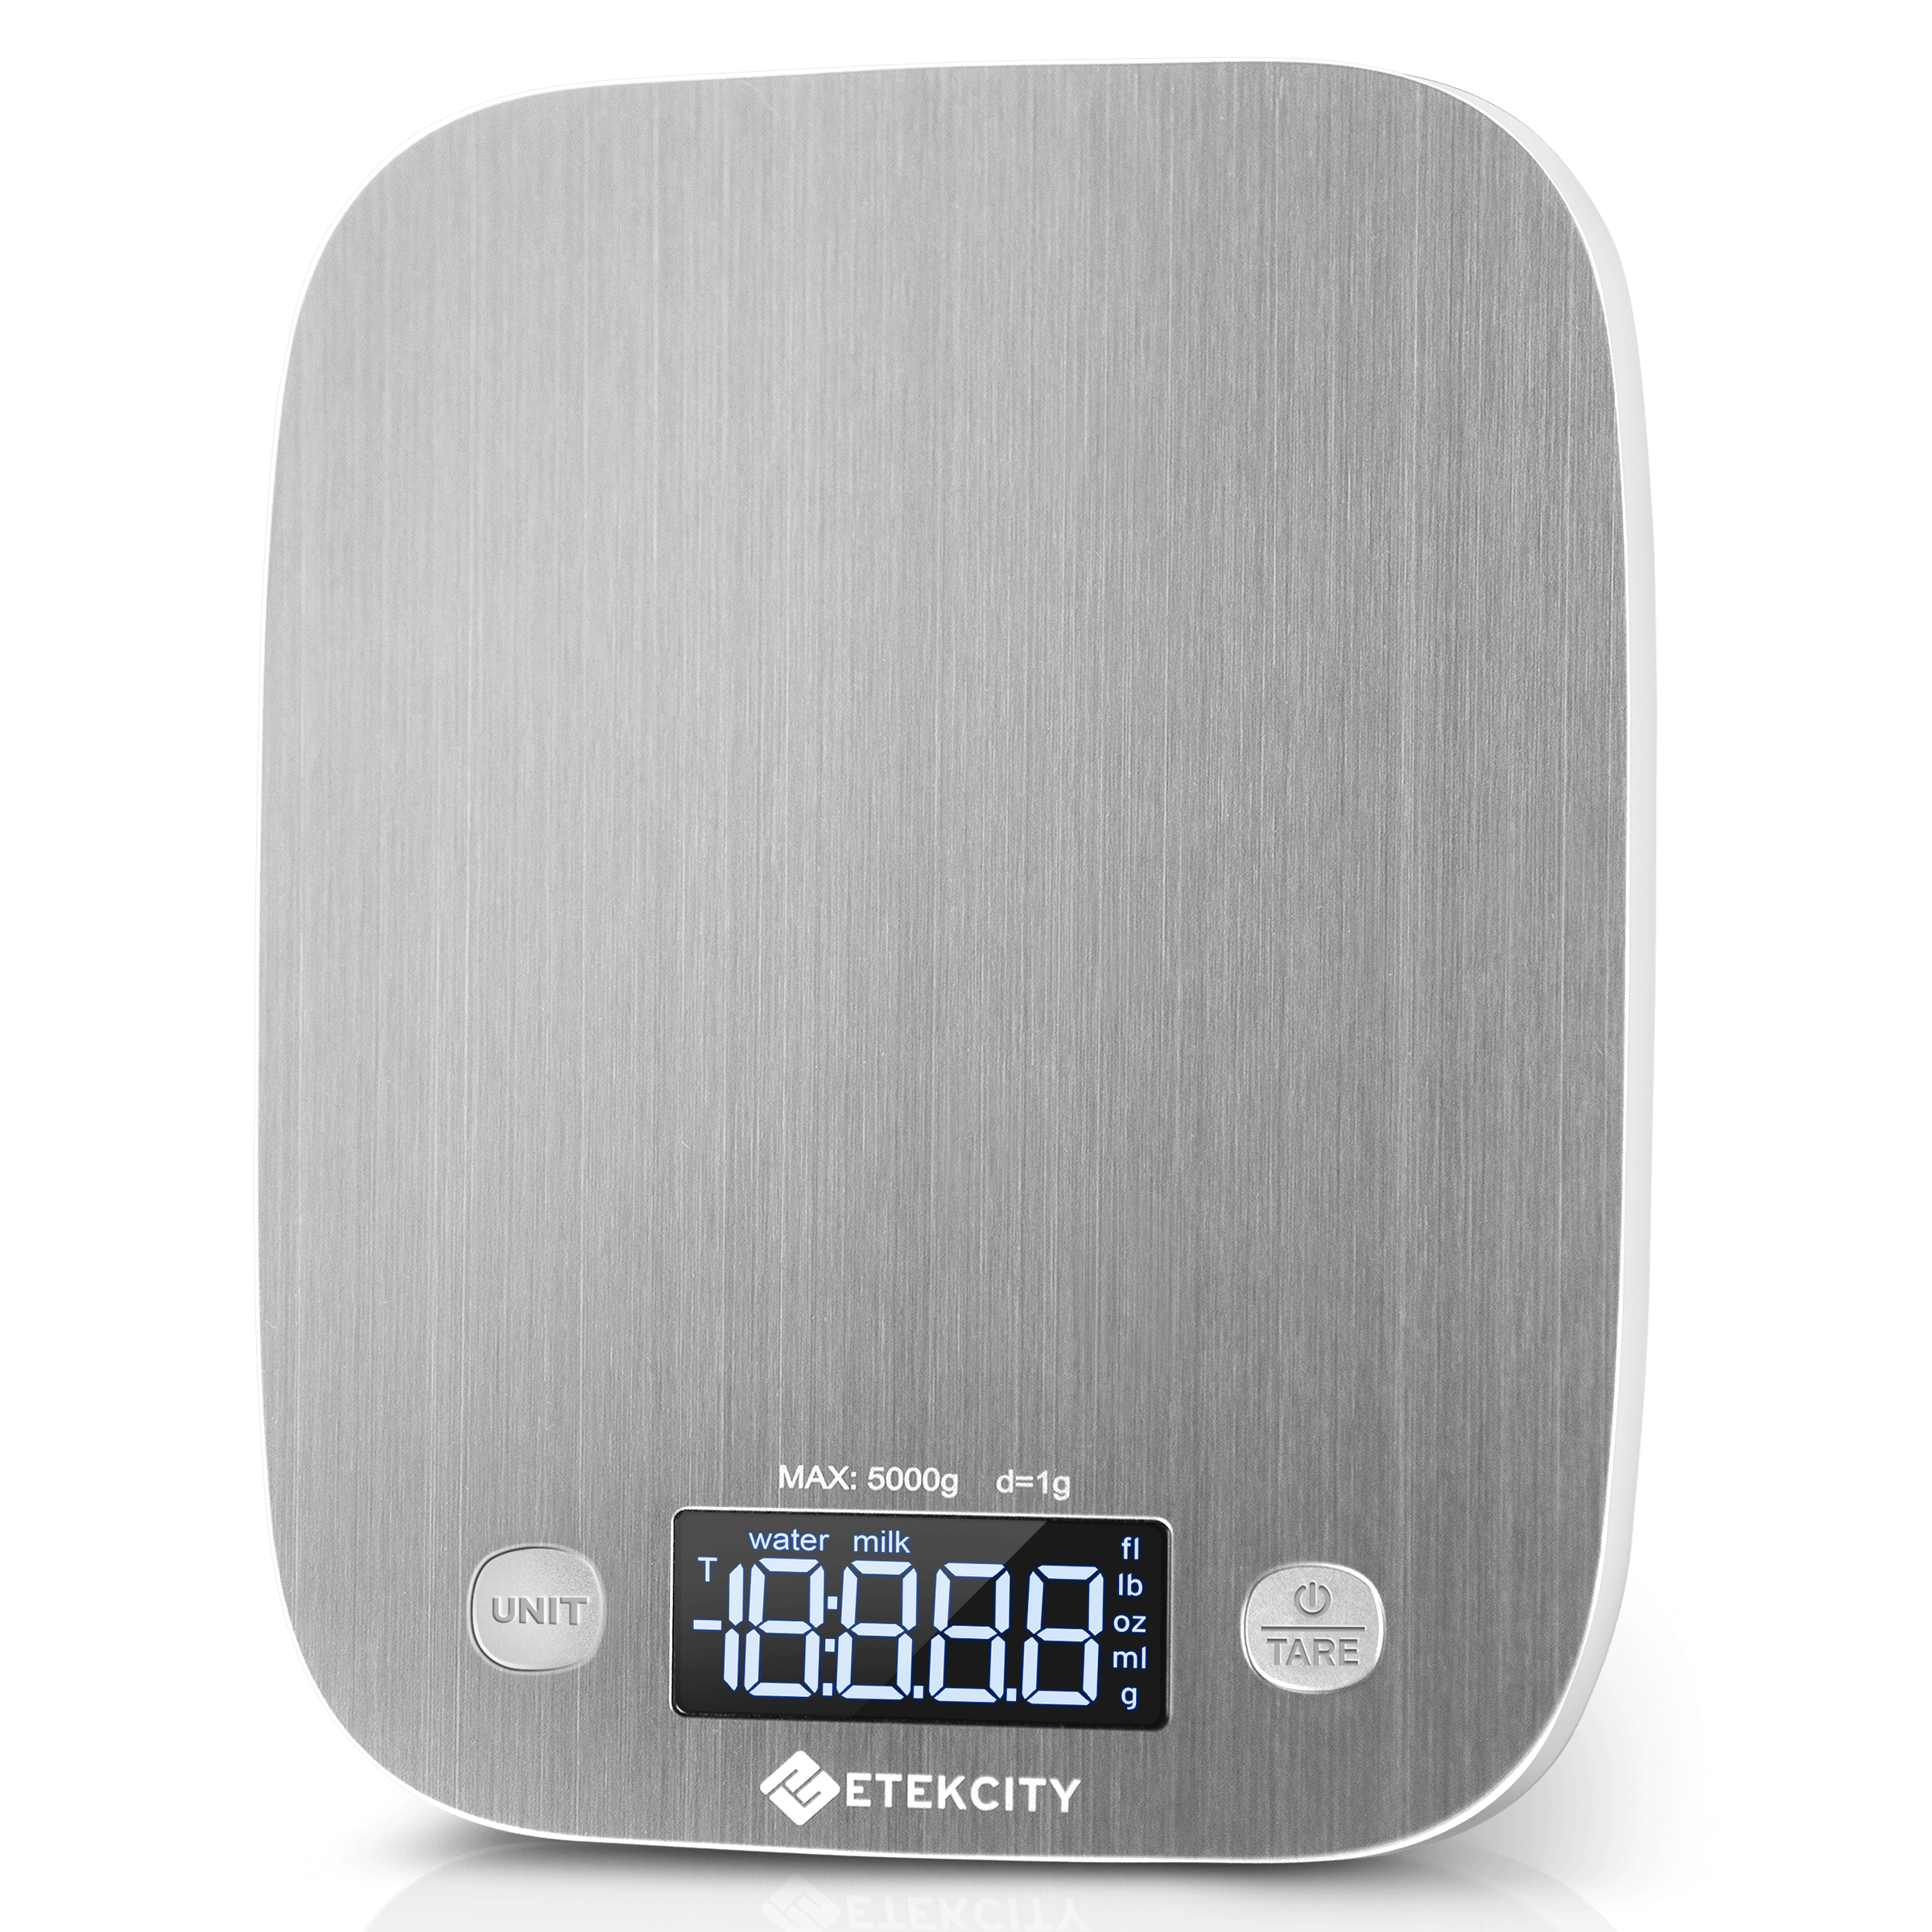 Etekcity kitchen Electronic Food Scale Digital Grams For Baking Cooking  Meal